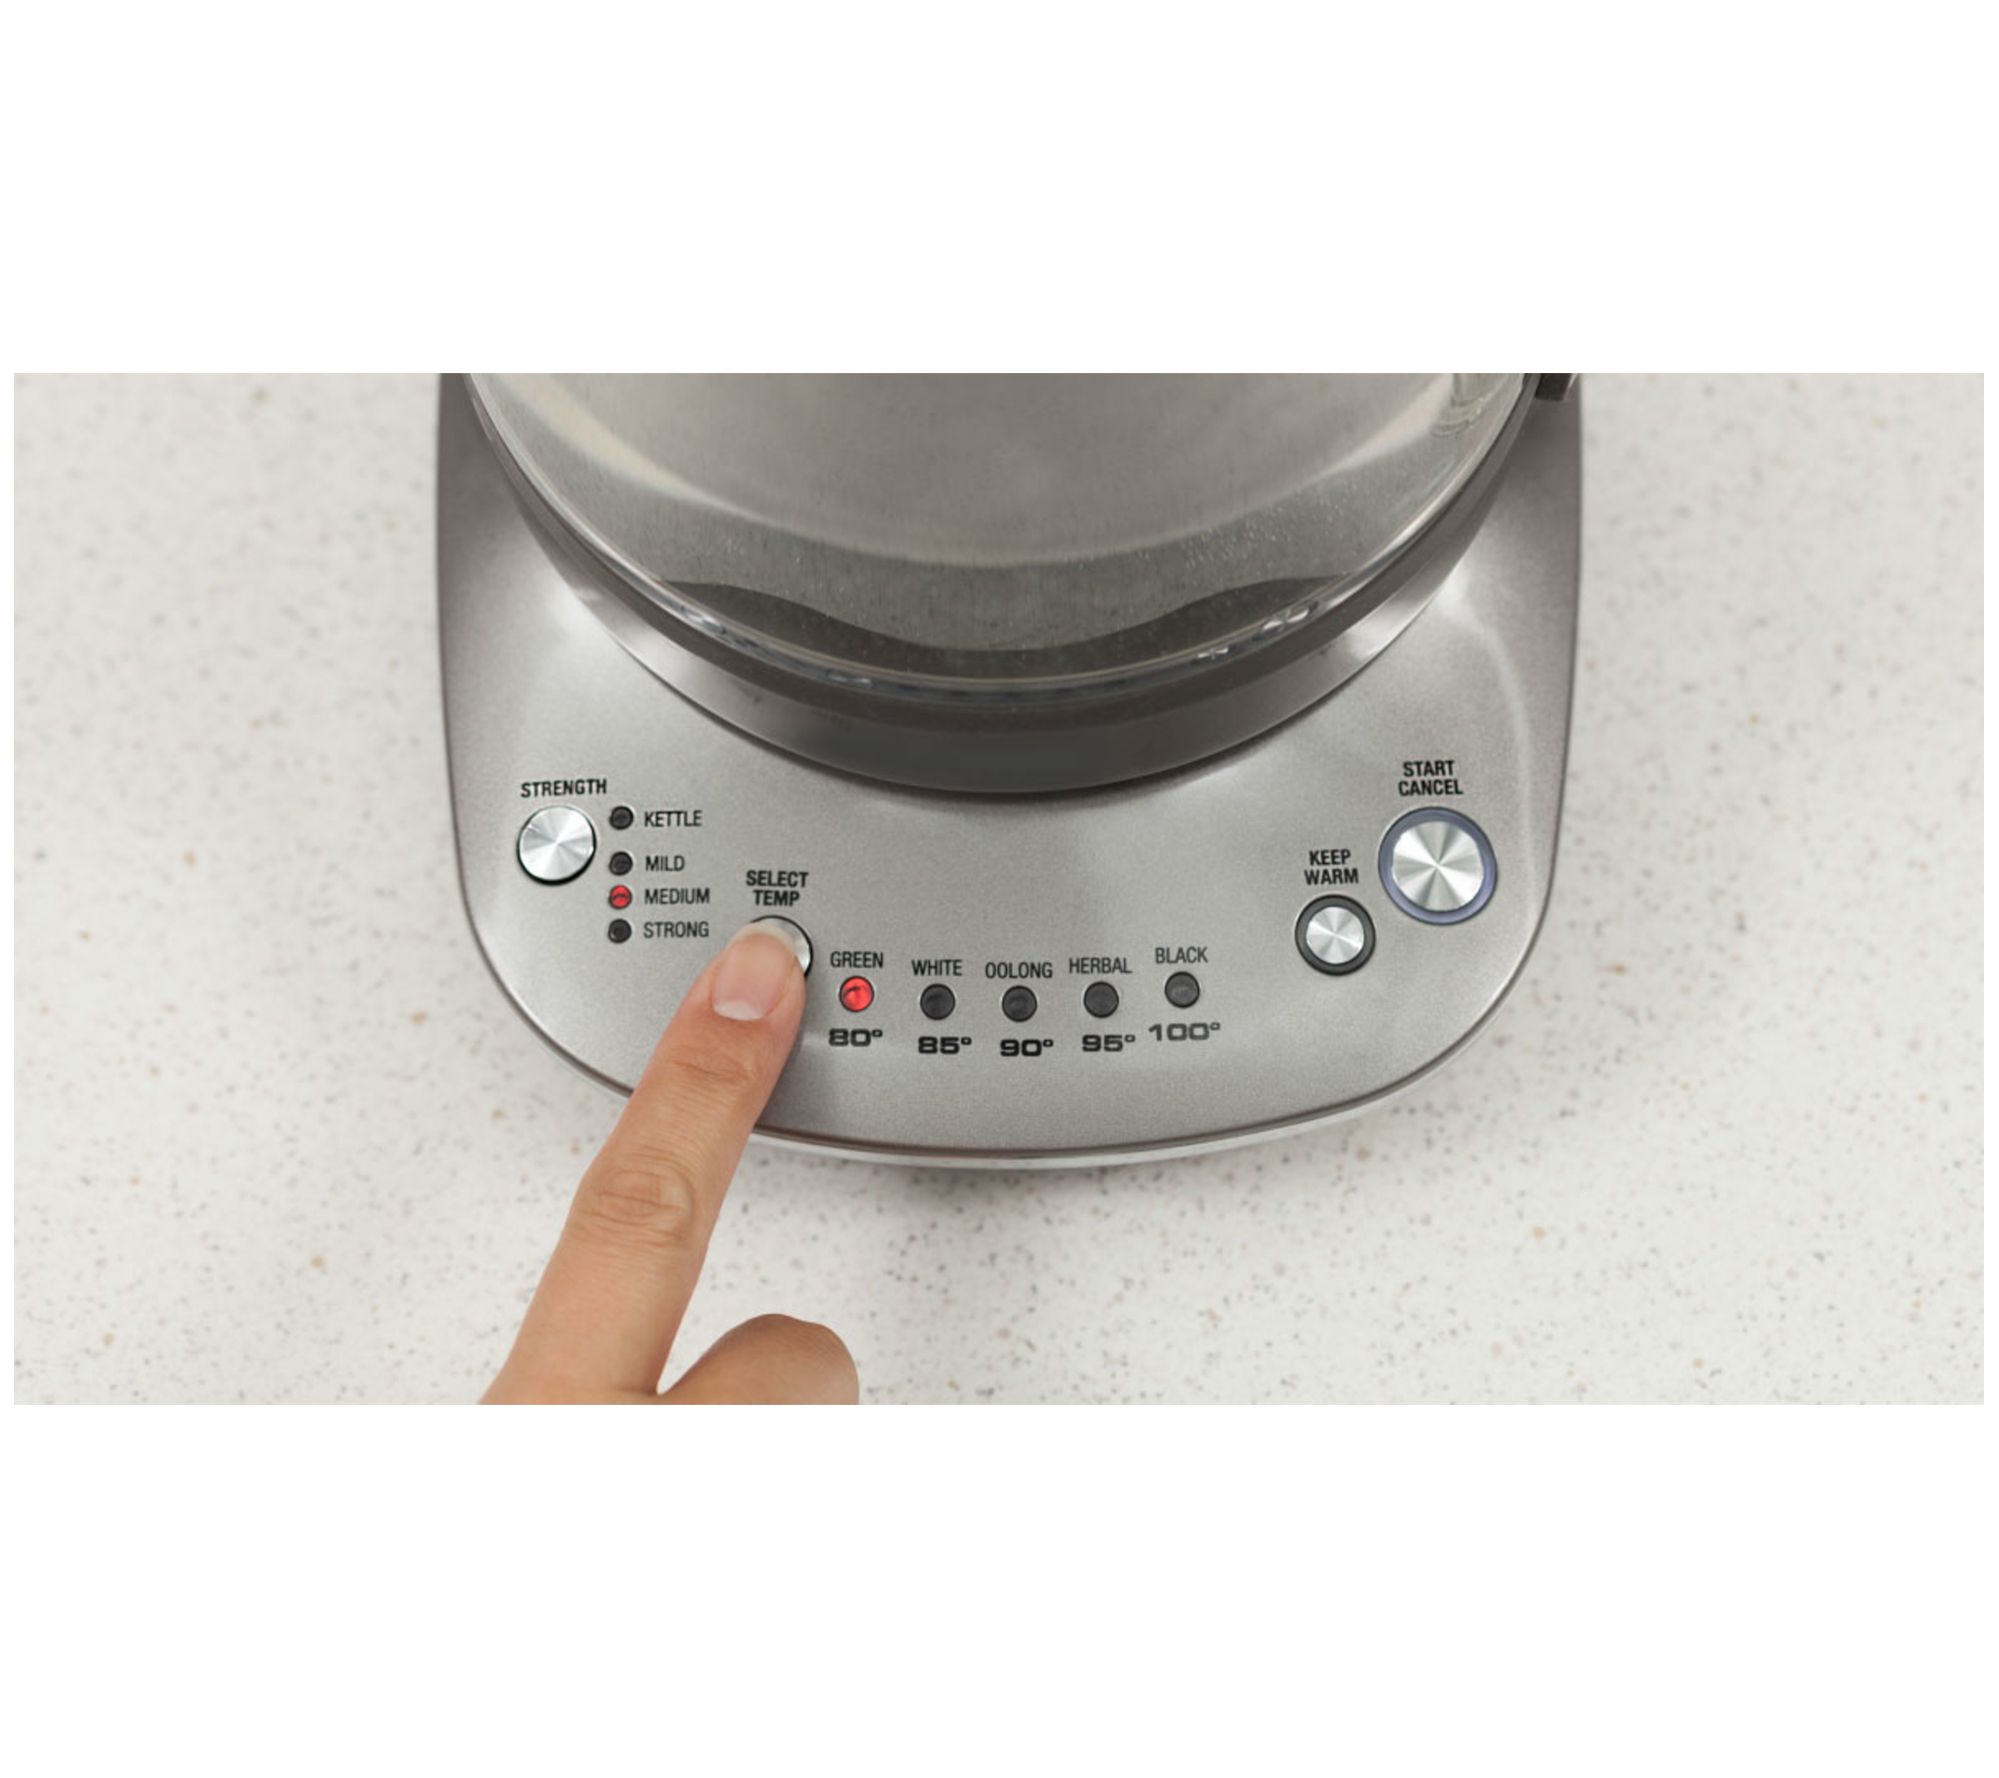 Breville IQ Kettle Pure, 5 Temperature Settings, Stainless Steel